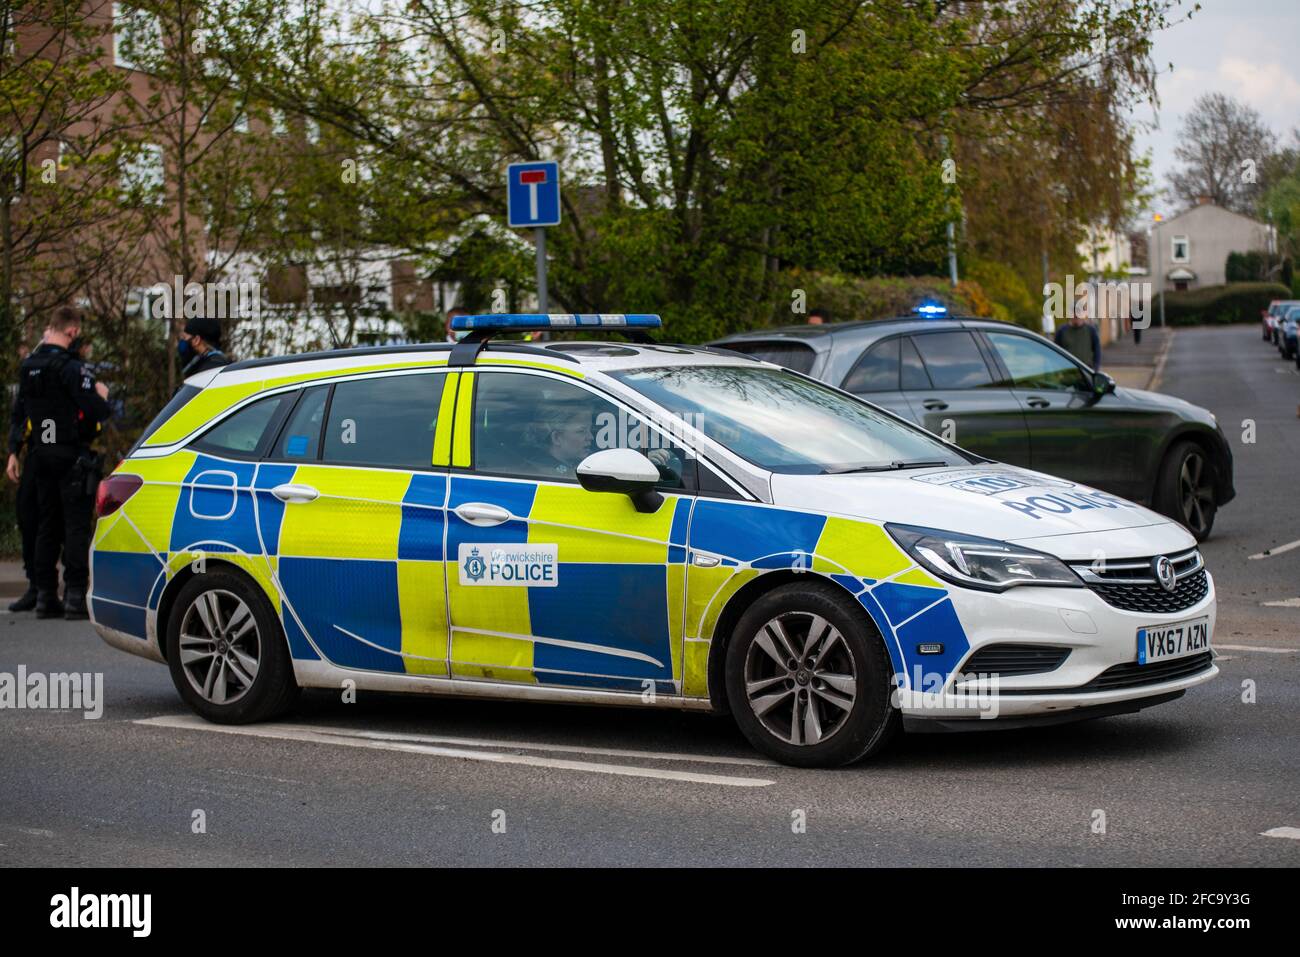 Warwickshire Police Vauxhall Astra at an incident in Leamington Spa Stock Photo